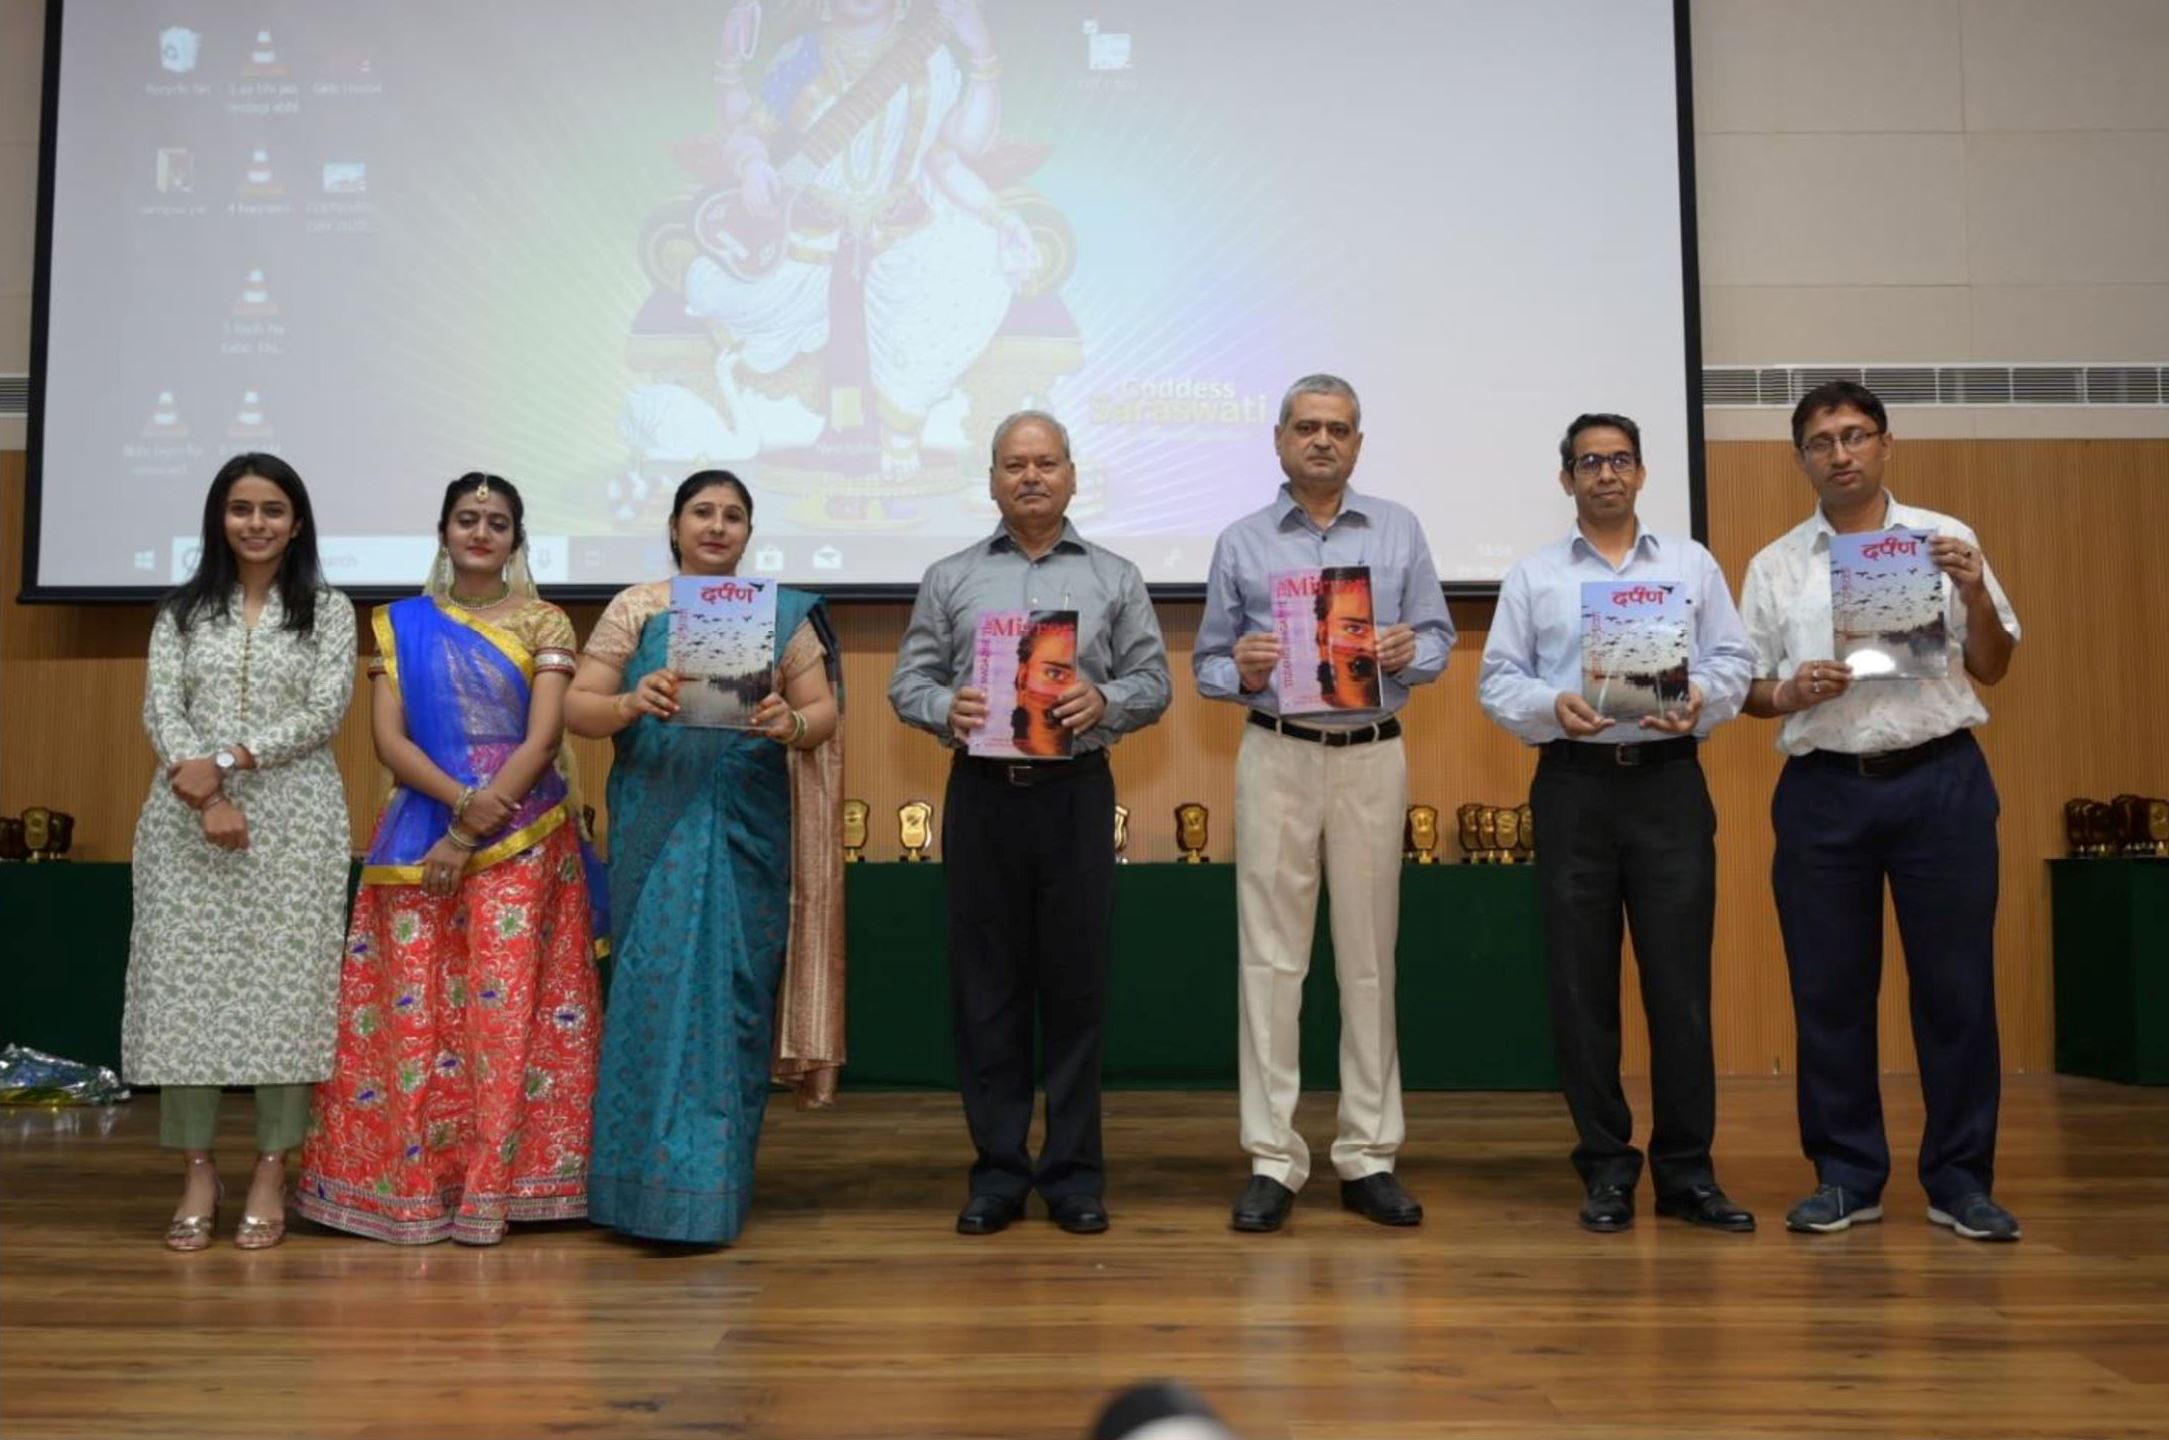 Release of Students’ magazine -“The Mirror”